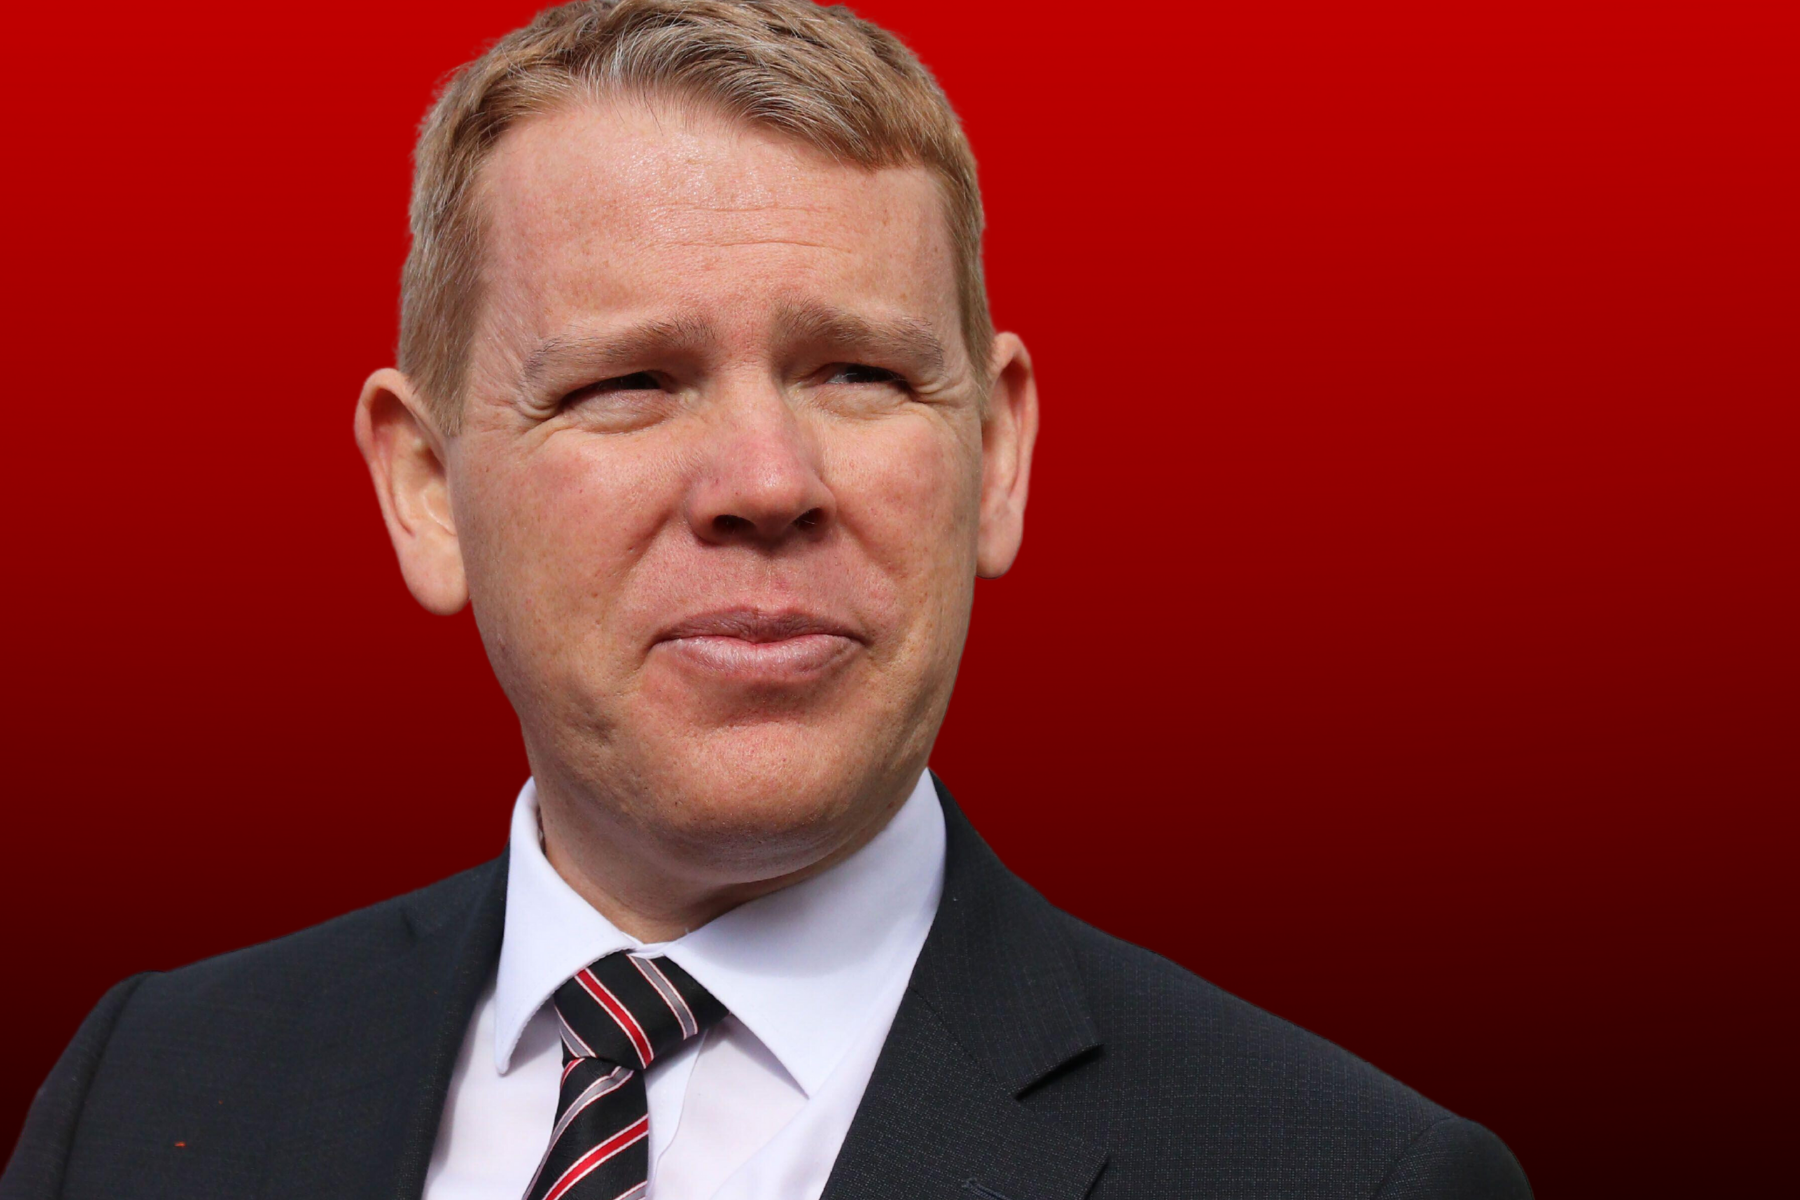 Hipkins’ concession speech reiterates the ideology that lost Labour the election